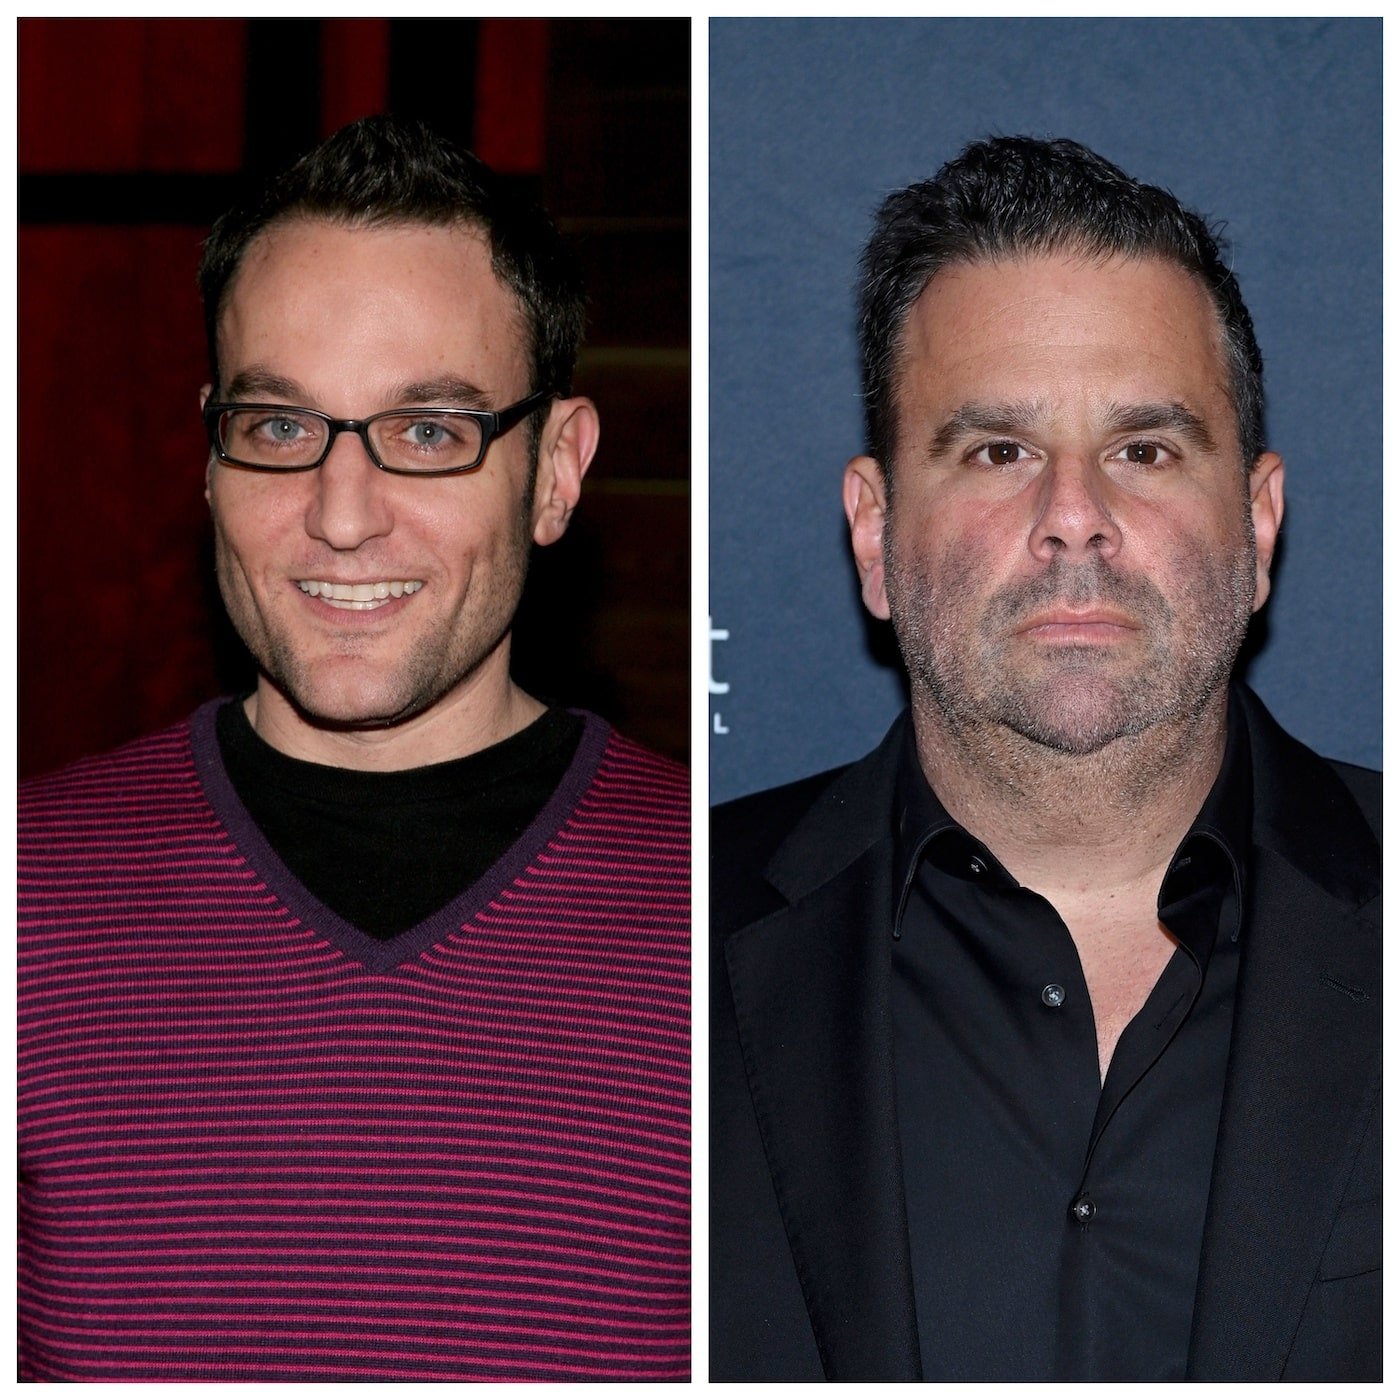 David Yontef and Randall Emmett during media events